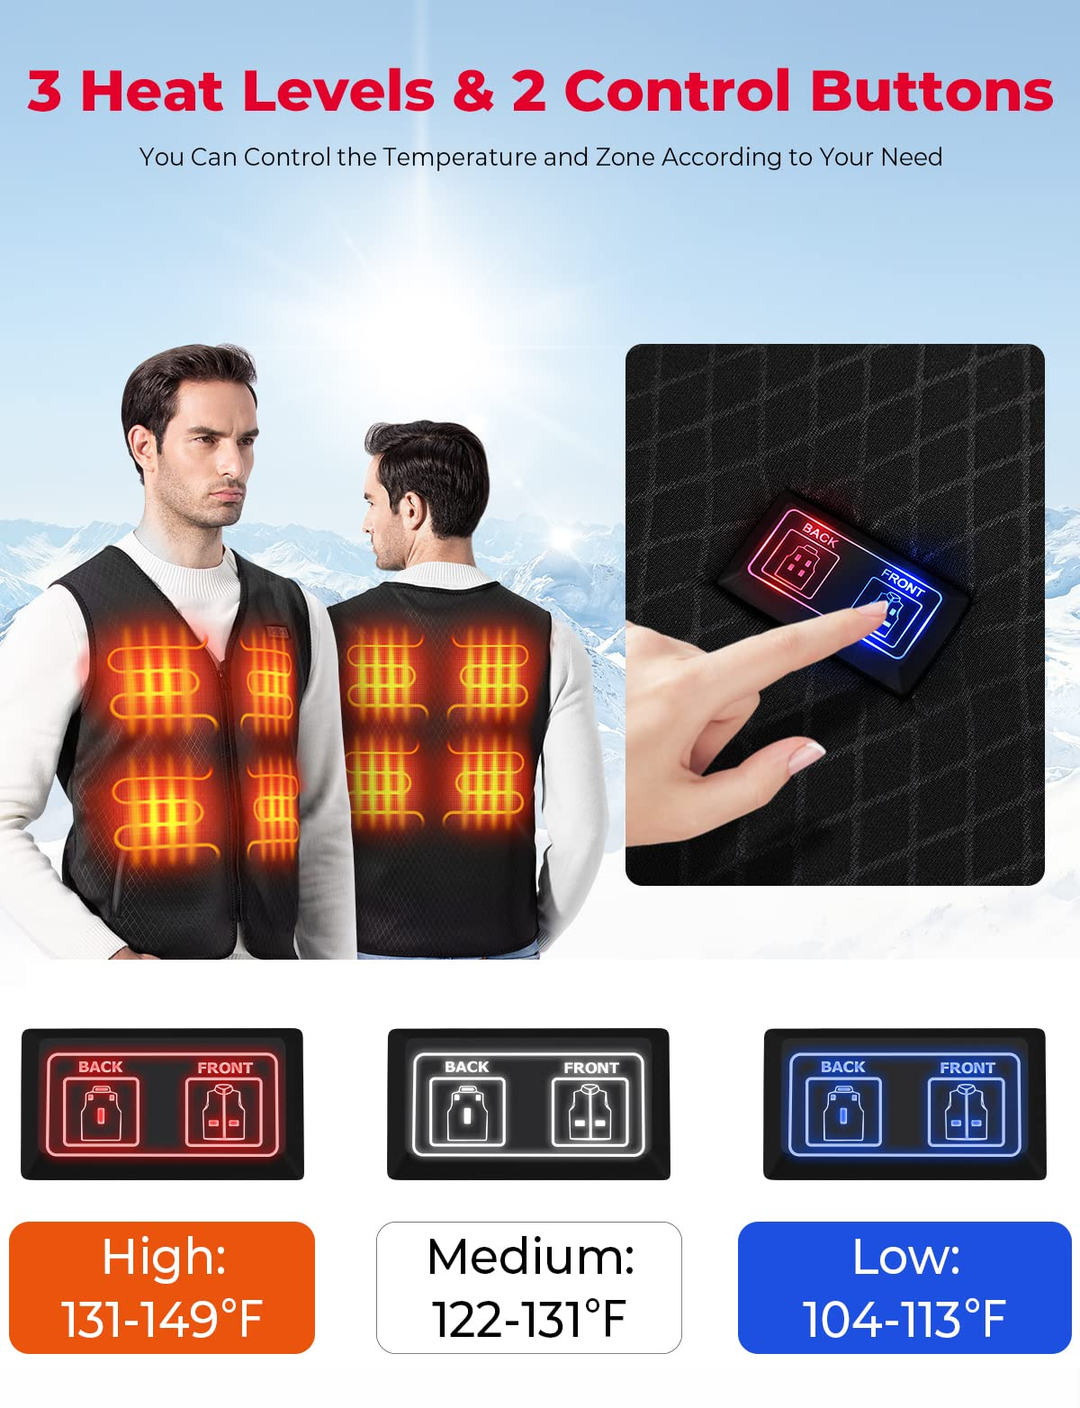 Winter Warming Heating Vest, BATTERY NOT INCLUDED - Kemimoto